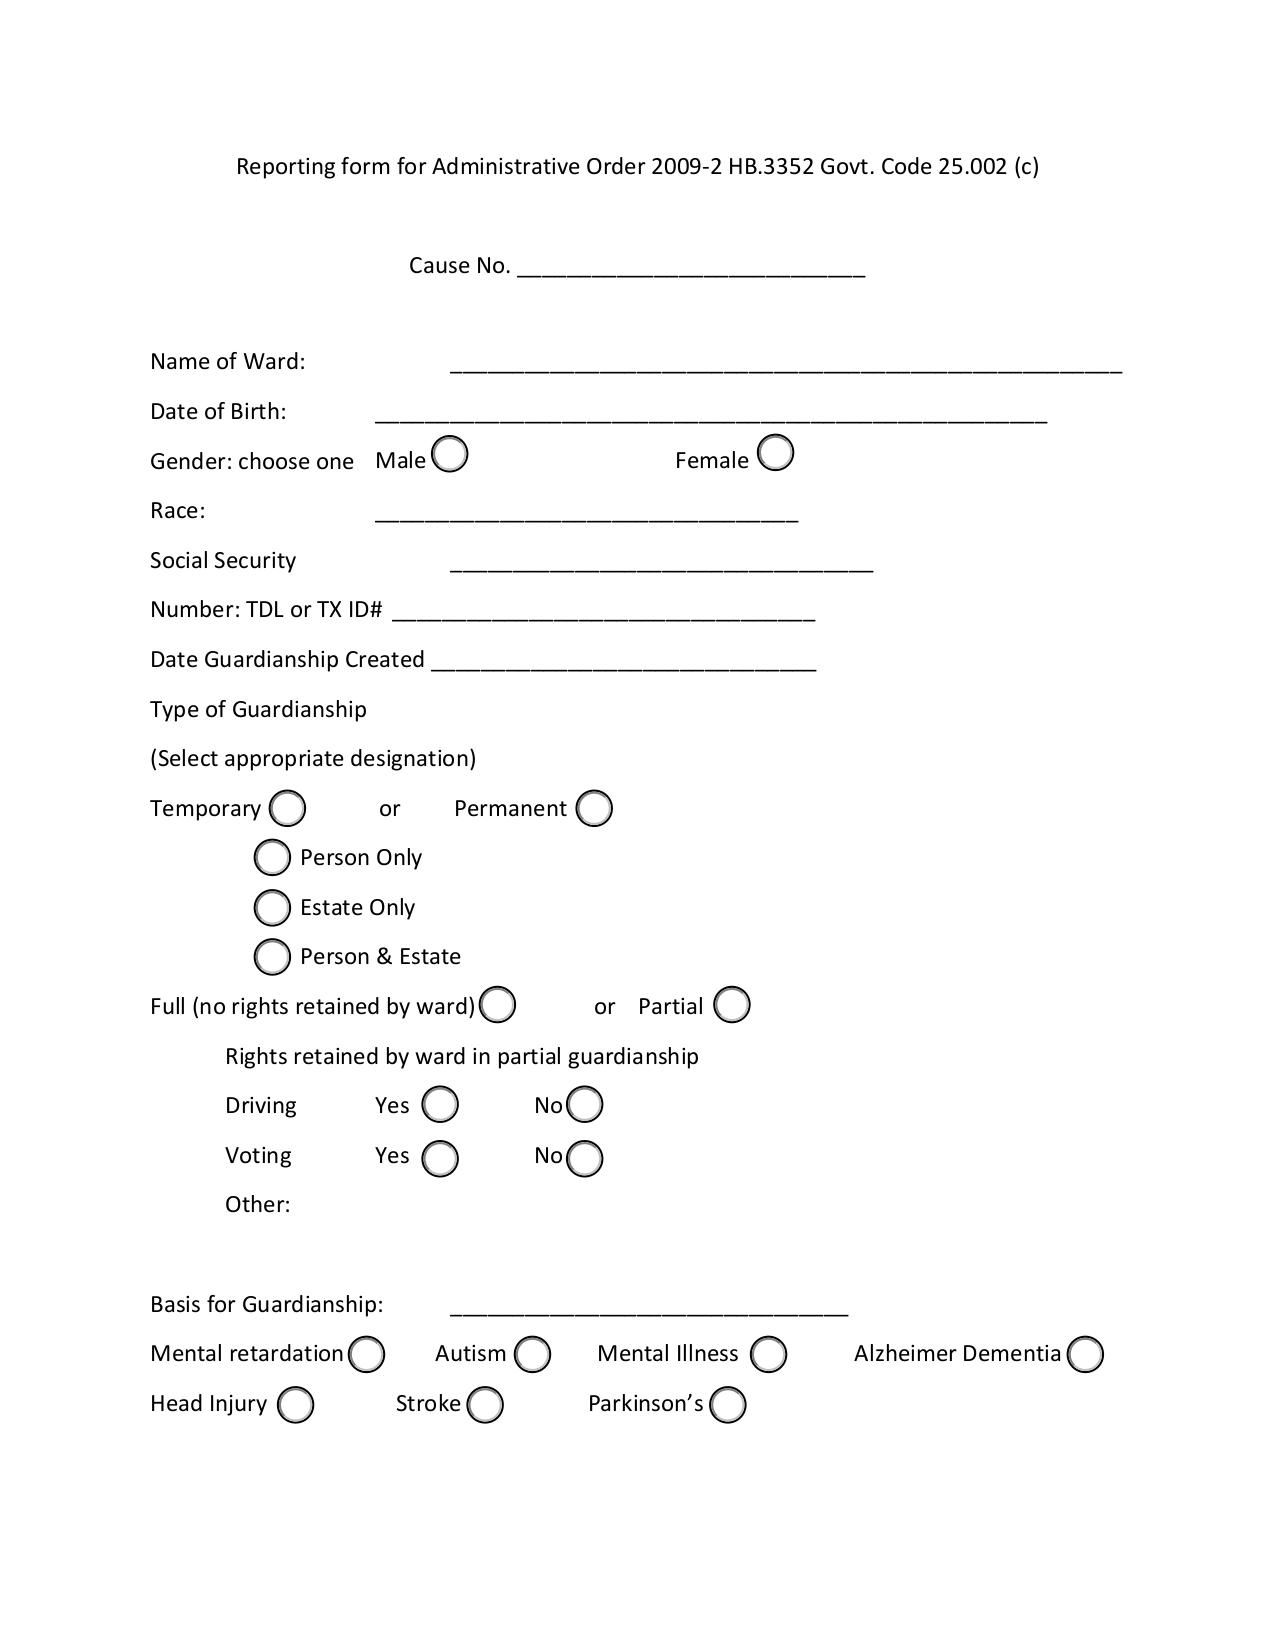 Firearm Report form for Administrative Order Form | Fill and sign ...